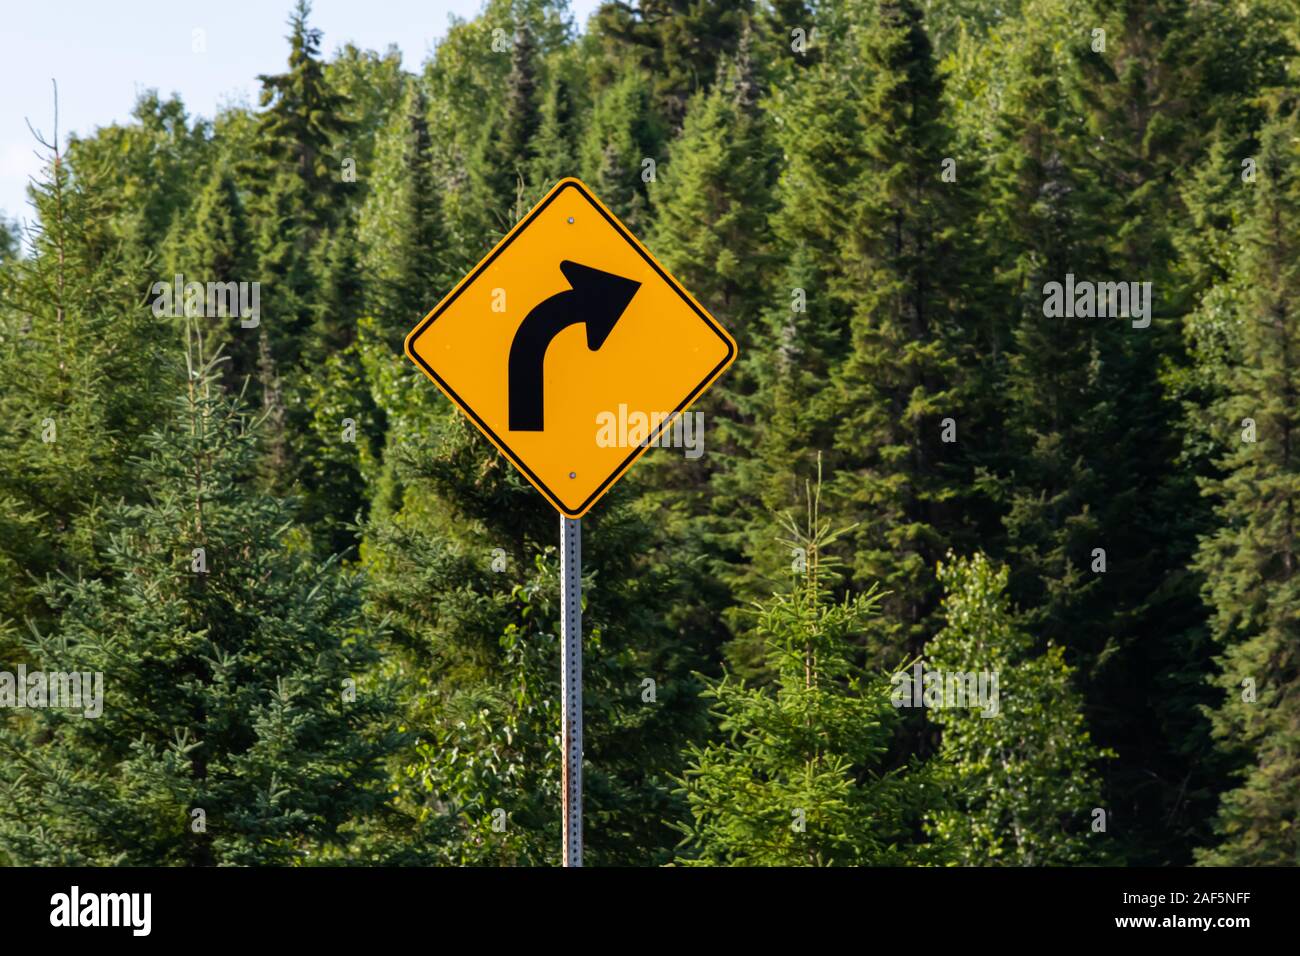 Warning for a curve to the right, Slight bend or curve in the road ahead, Warning  road signs, in selective focus view with forest trees background Stock  Photo - Alamy